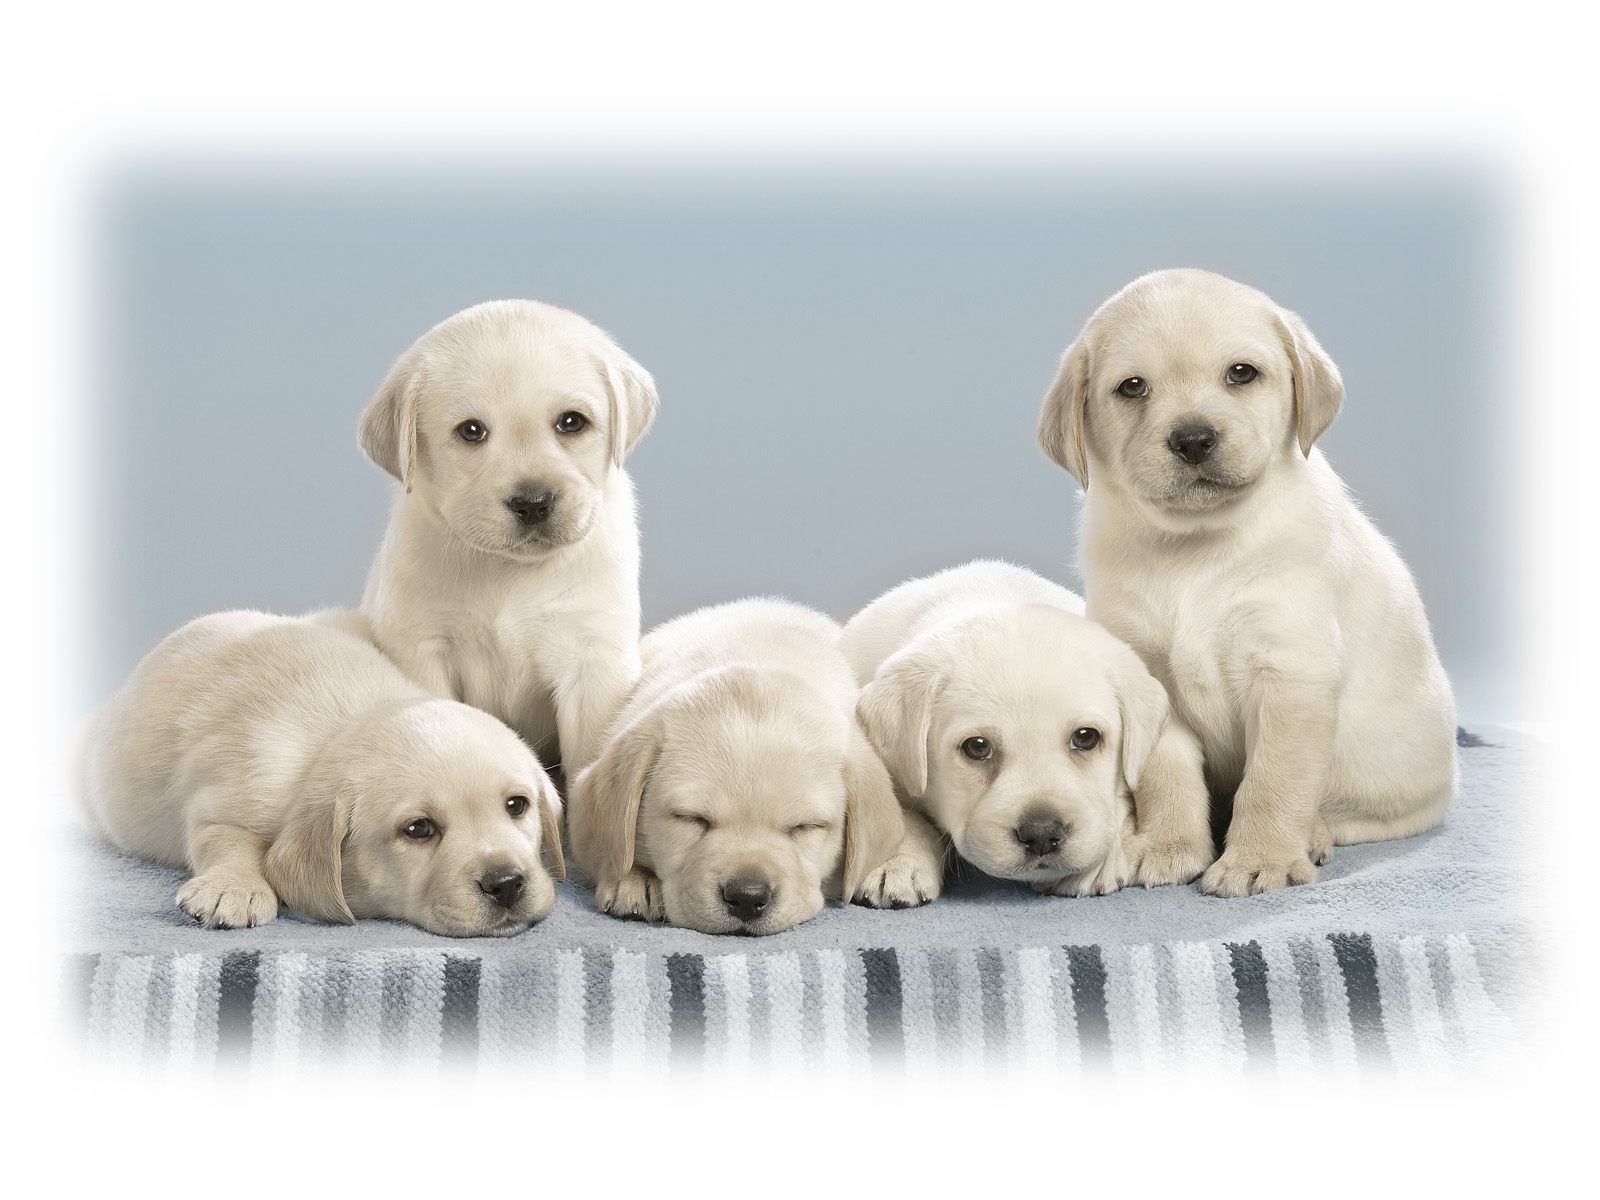 Puppy Pictures Website Cute Puppy Pictures Cute Puppy Wallpaper